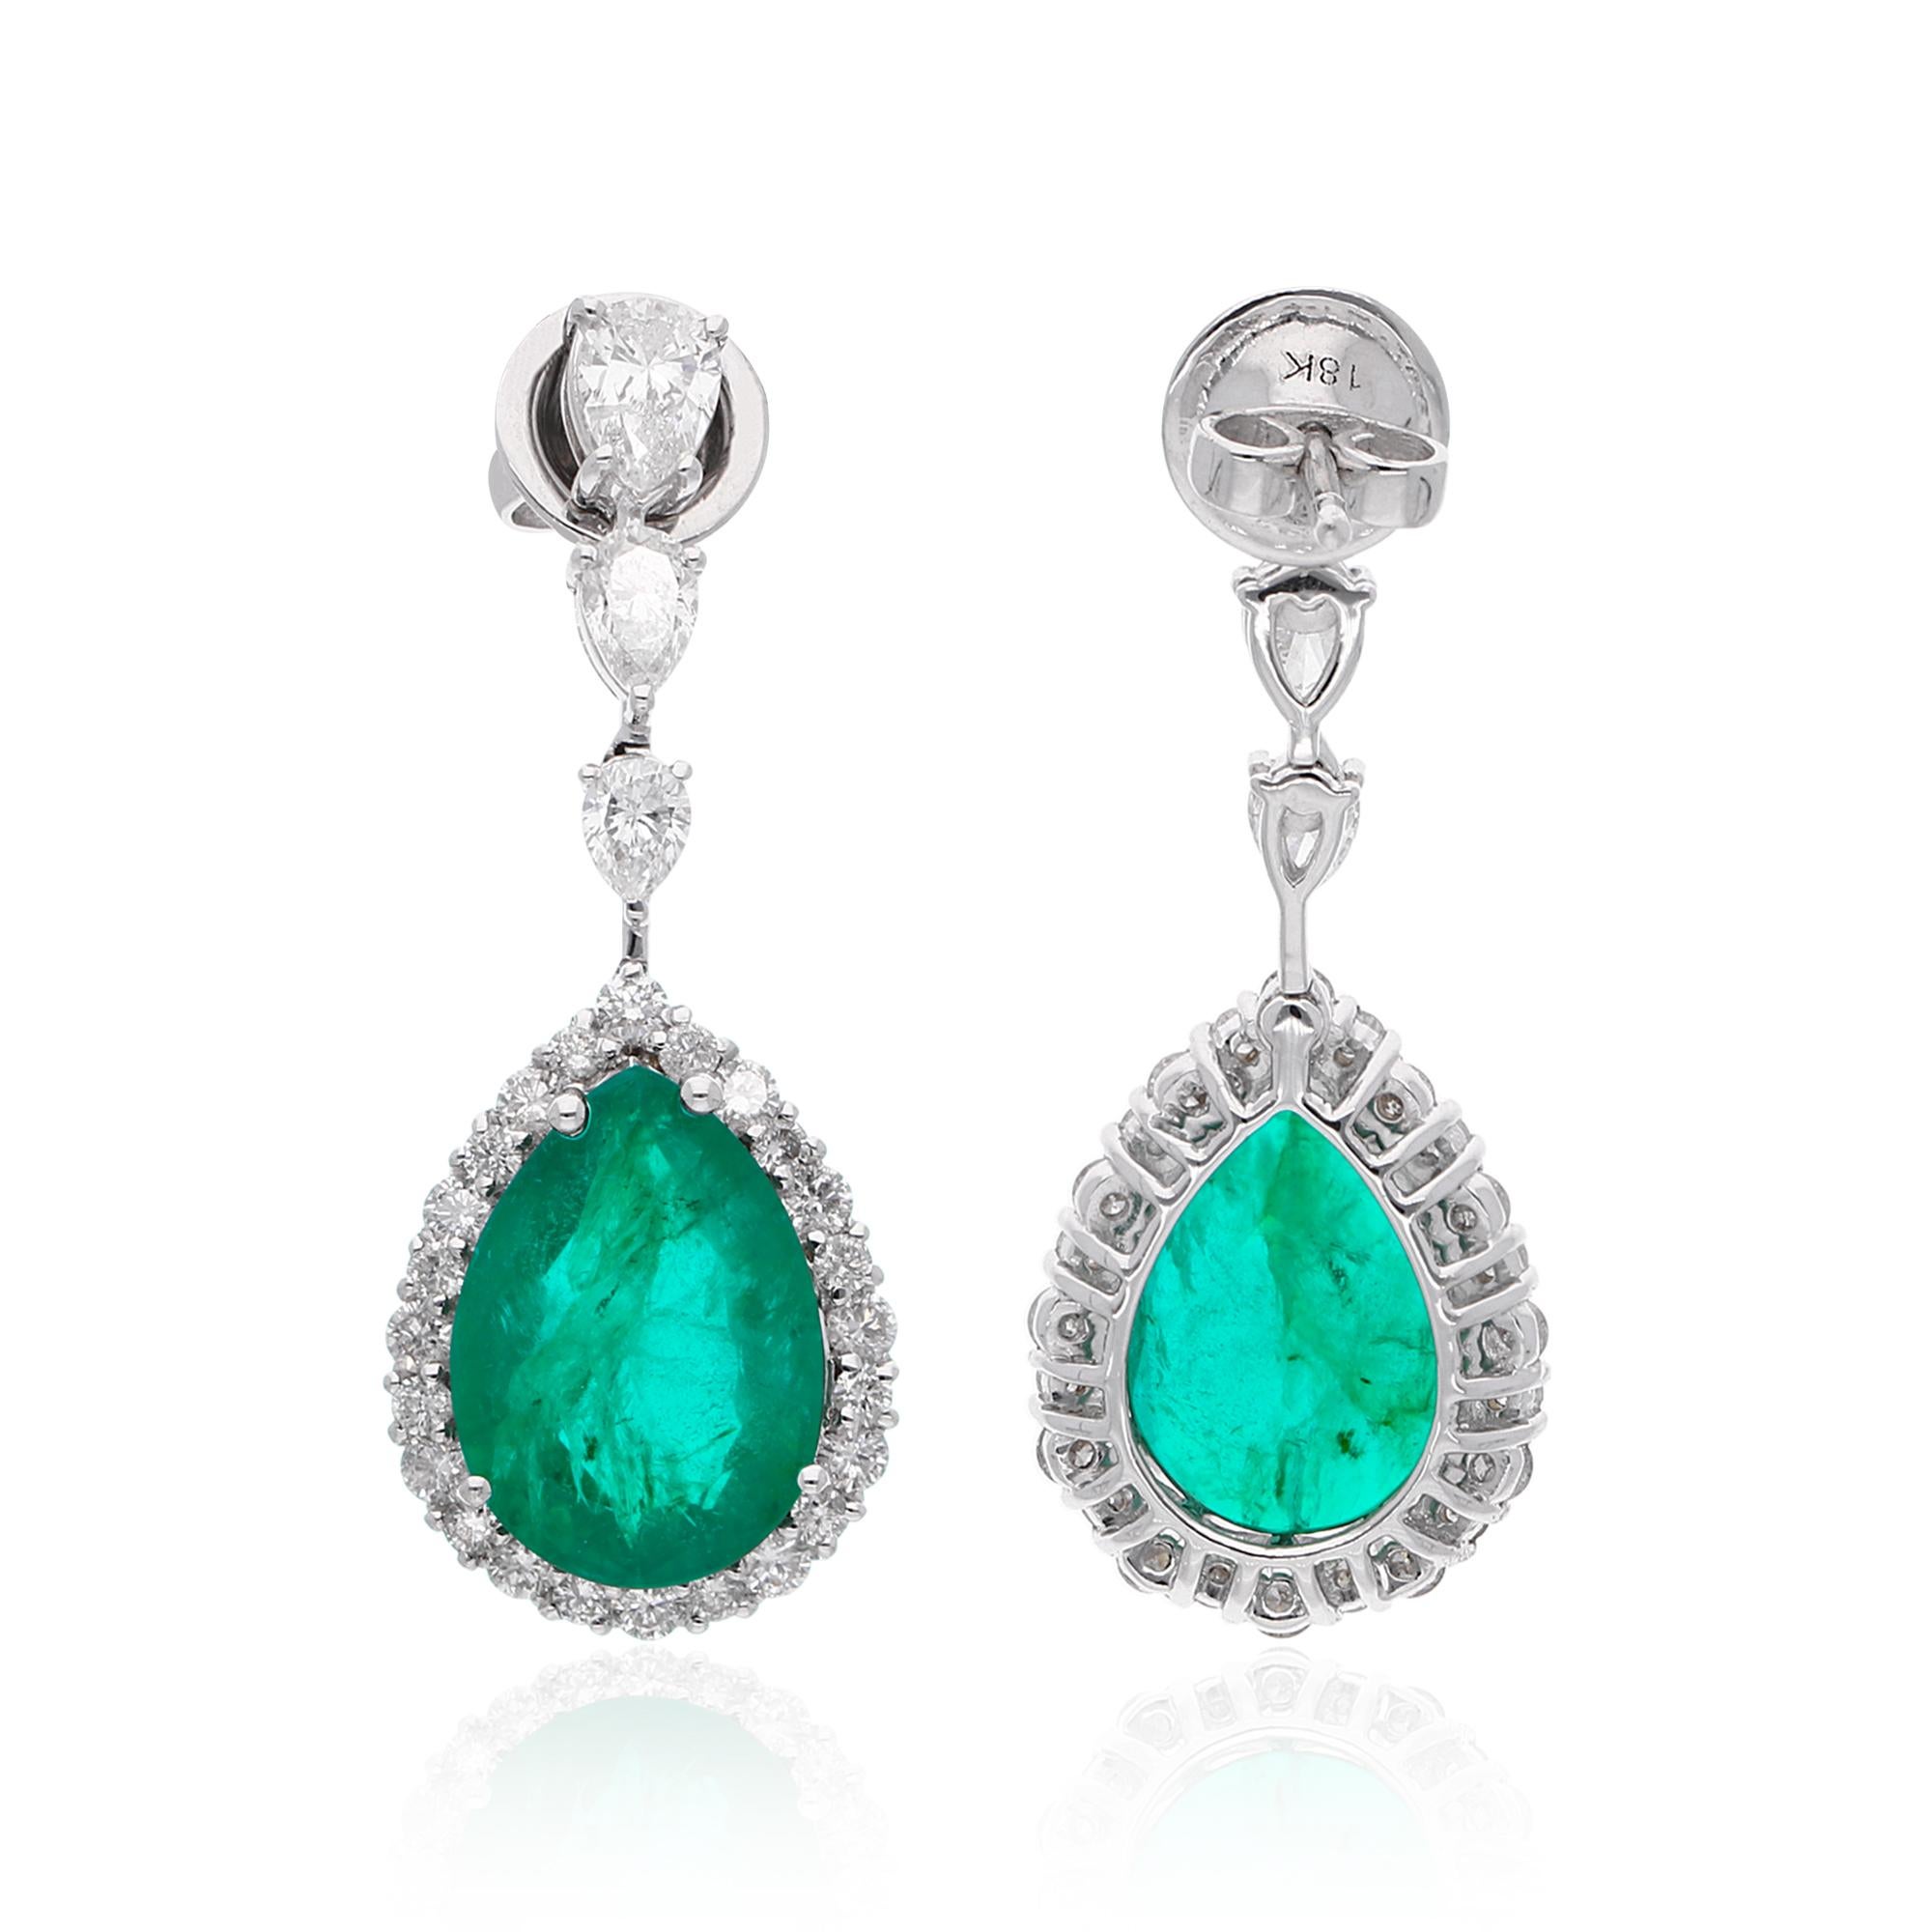 Item Code :- SEE-12629
Gross Wt. :- 7.94 gm
18k White Gold Wt. :- 5.90 gm
Diamond Wt. :- 2.21 Ct. ( AVERAGE DIAMOND CLARITY SI1-SI2 & COLOR H-I )
Emerald Wt. :- 7.98 Ct.
Earrings Size :- 33 mm approx.
✦ Sizing
.....................
We can adjust